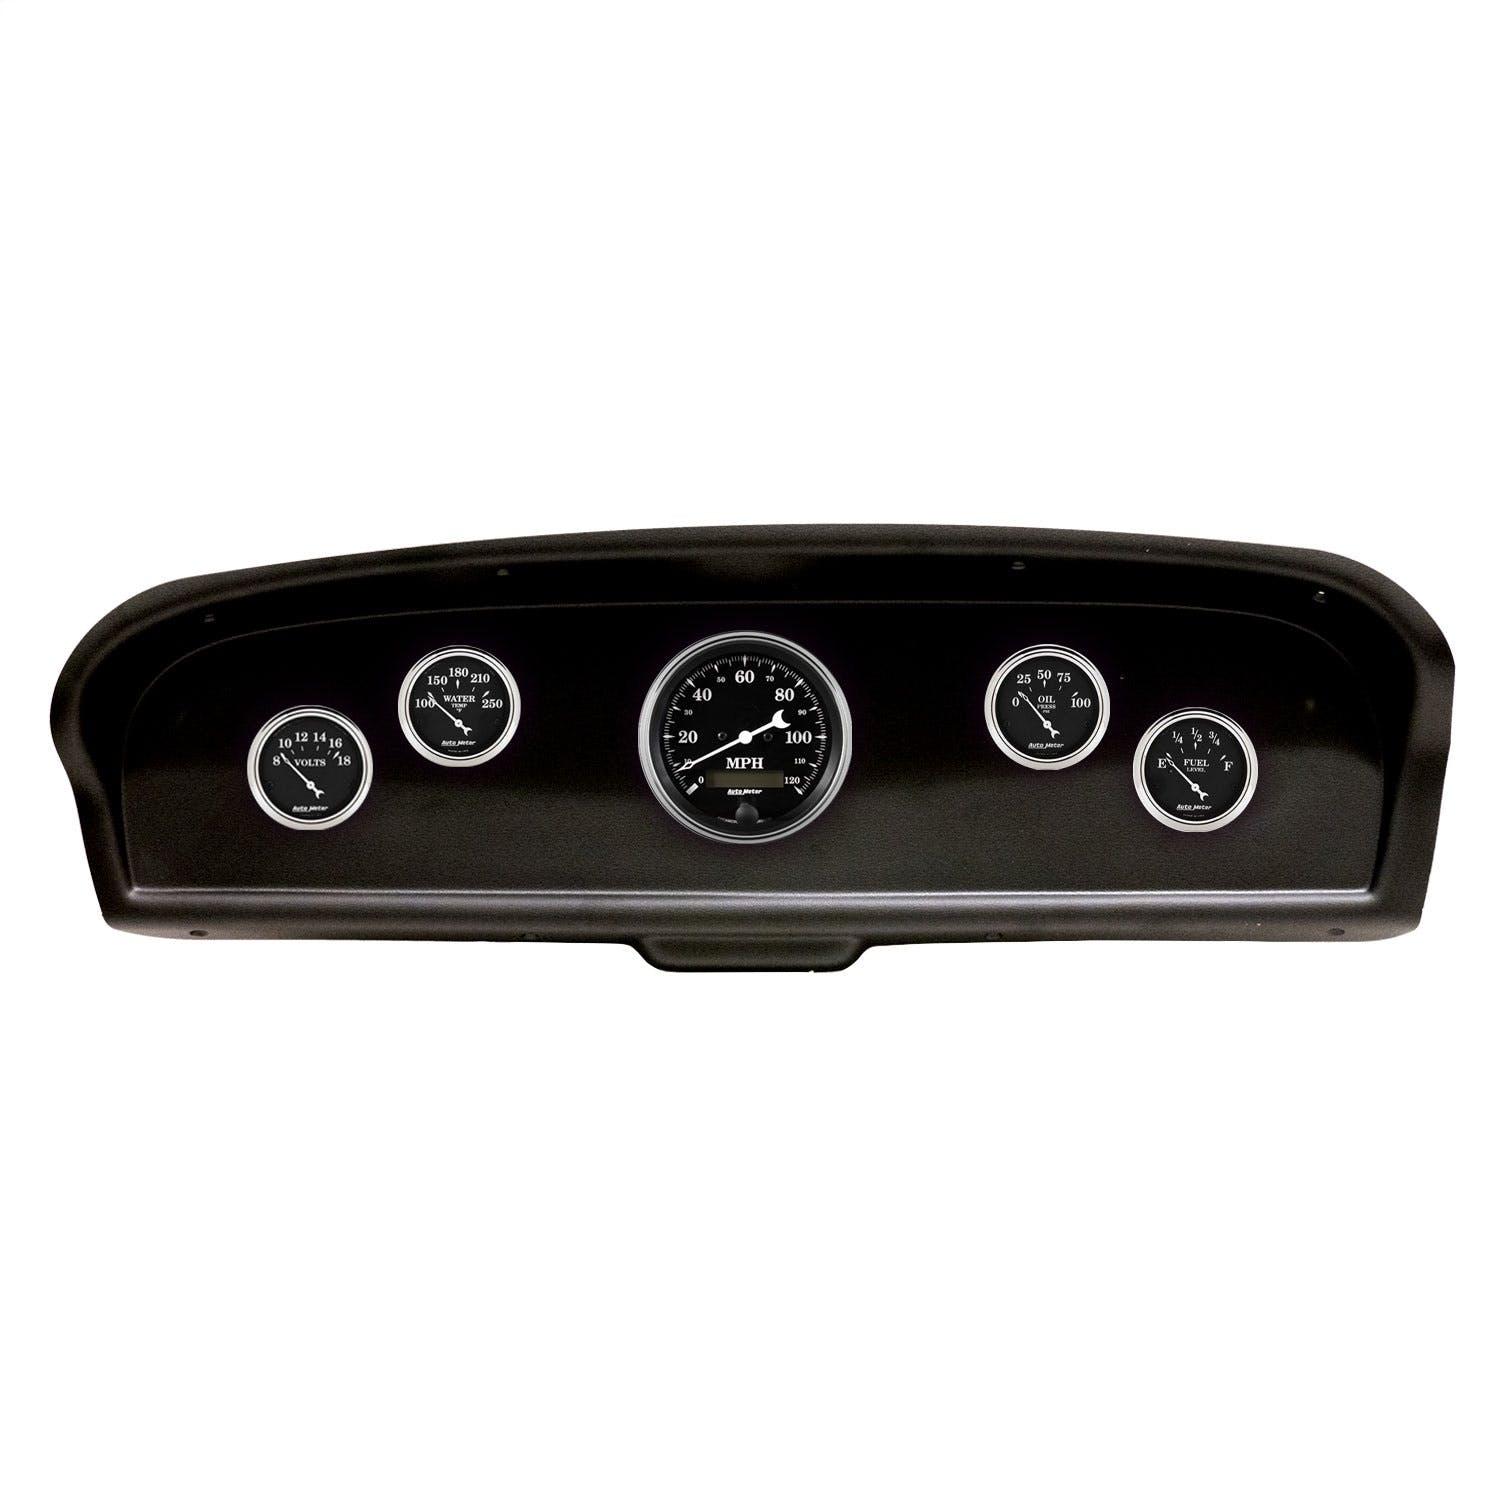 AutoMeter Products 2105-07 5 Gauge Direct-Fit Dash Kit, Ford Truck 61-66, Old Tyme Black